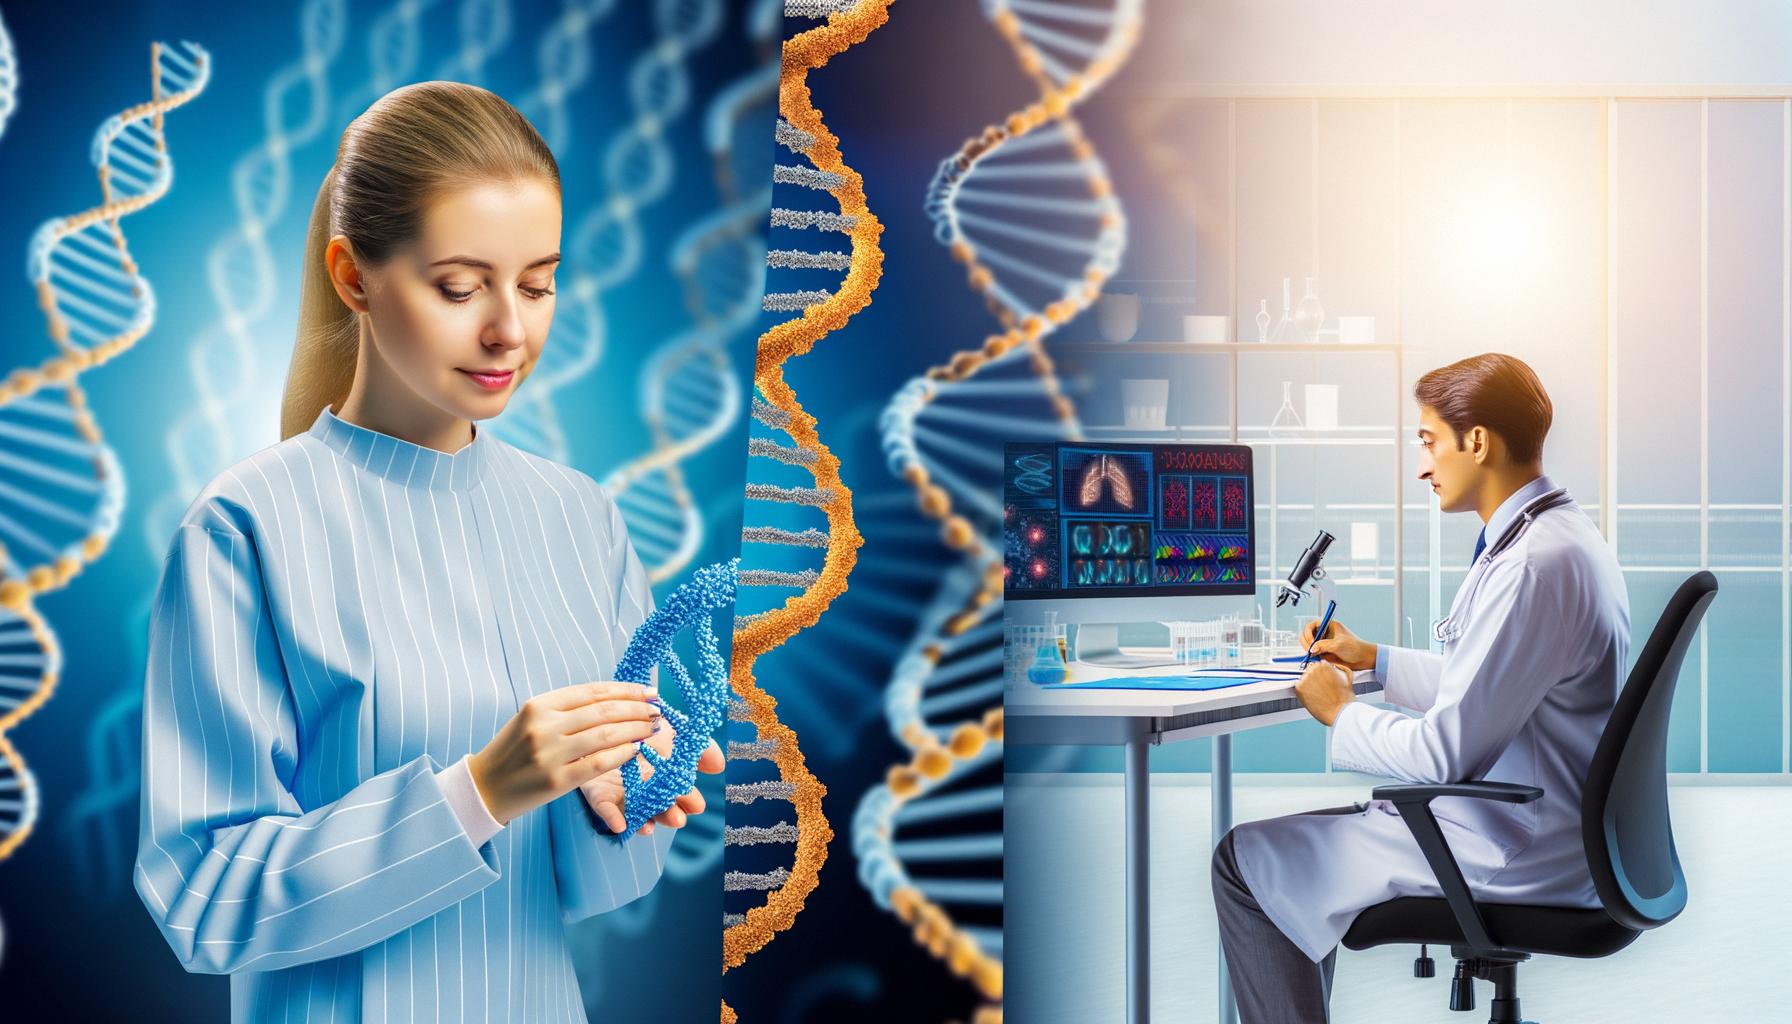 Precision medicine is advancing through technological, regional, and research collaborations.